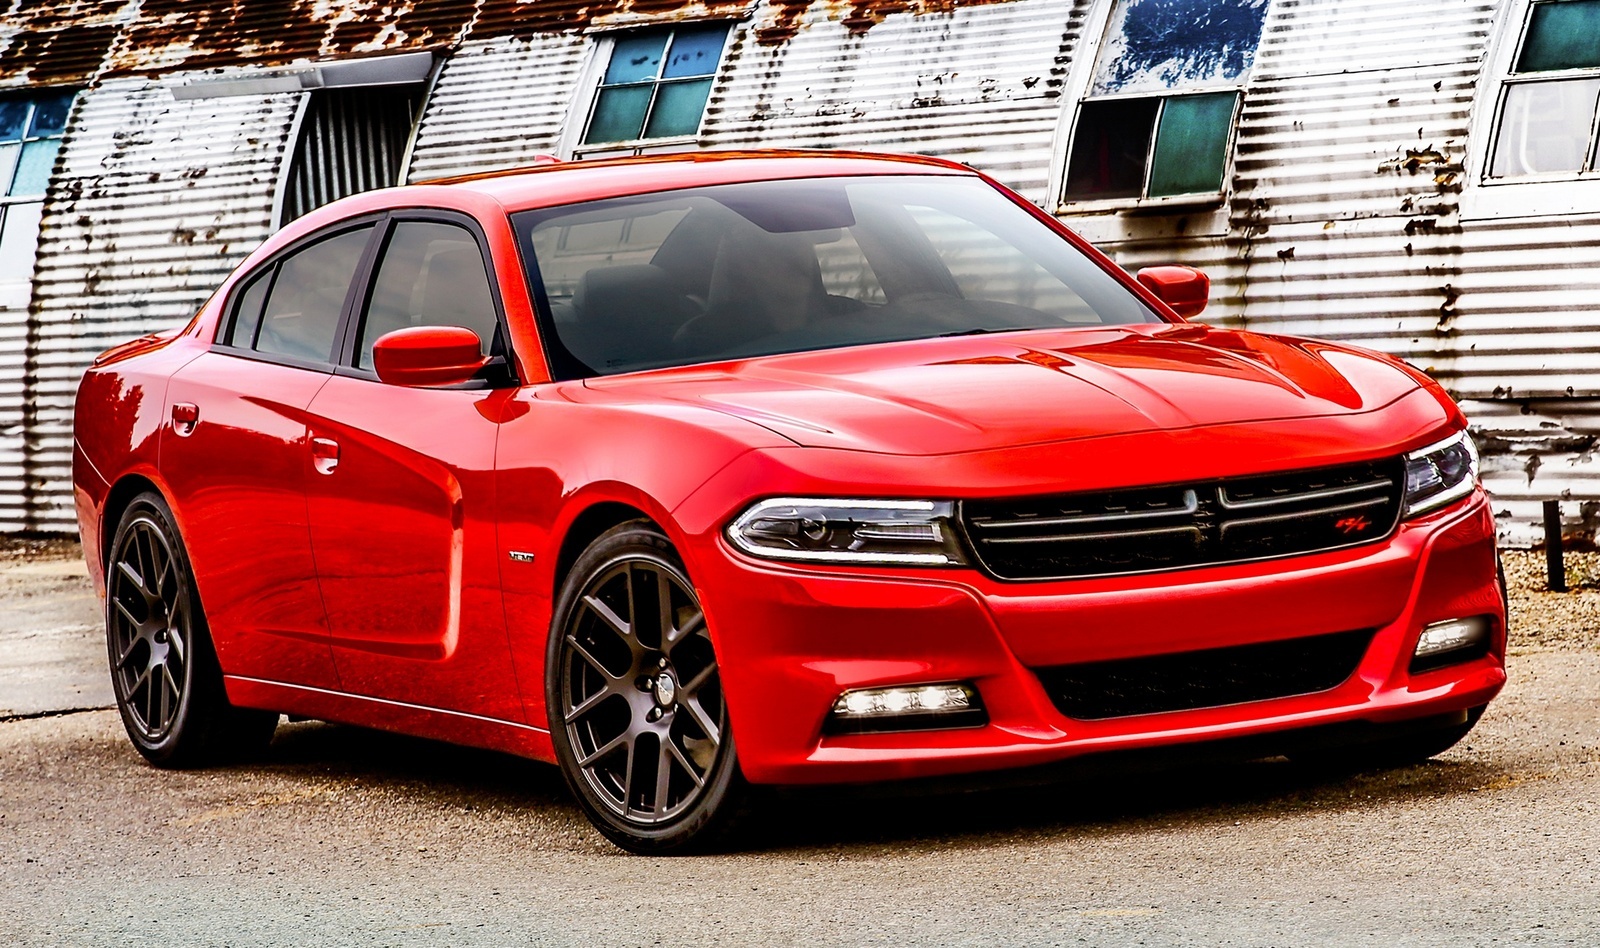 Video Review: 2015 Dodge Charger Expert Test Drive - CarGurus